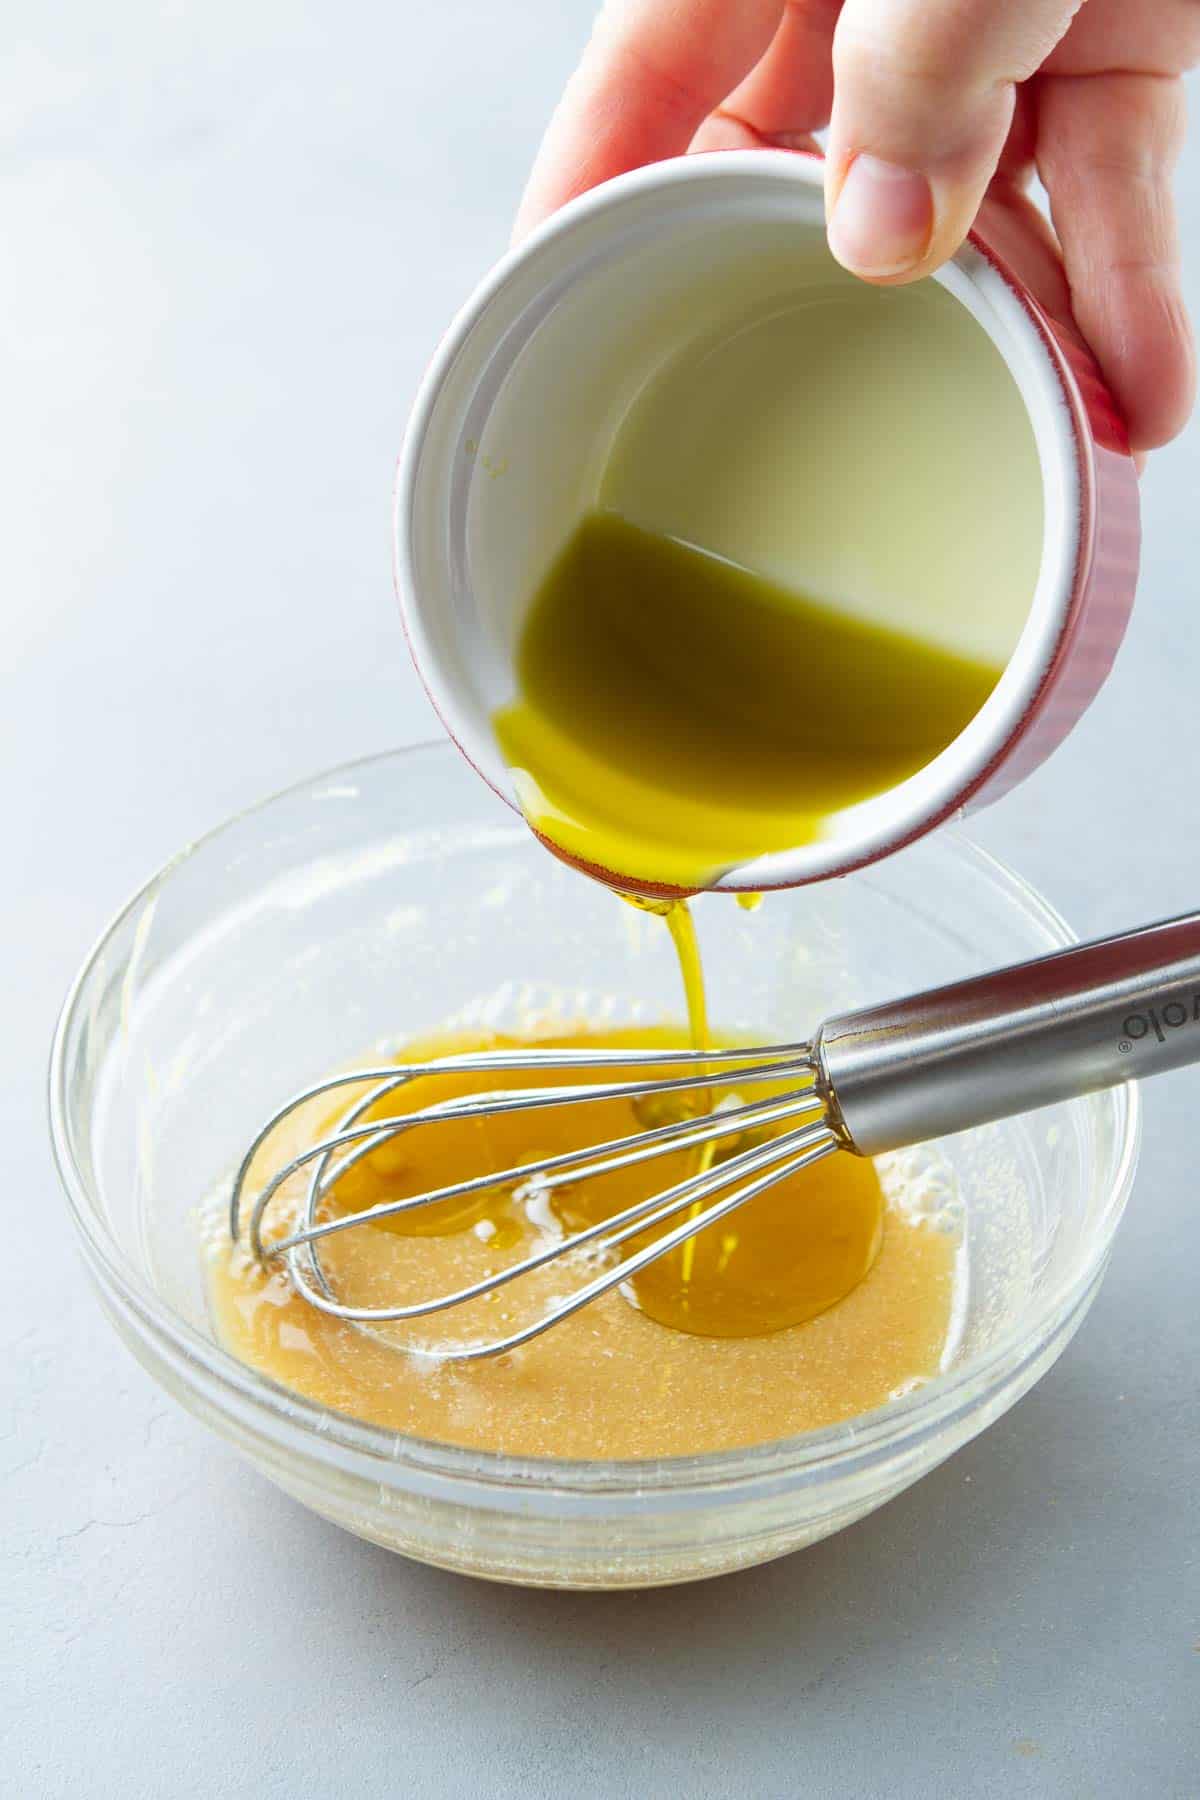 Pouring olive oil into a glass bowl filled with salad dressing.